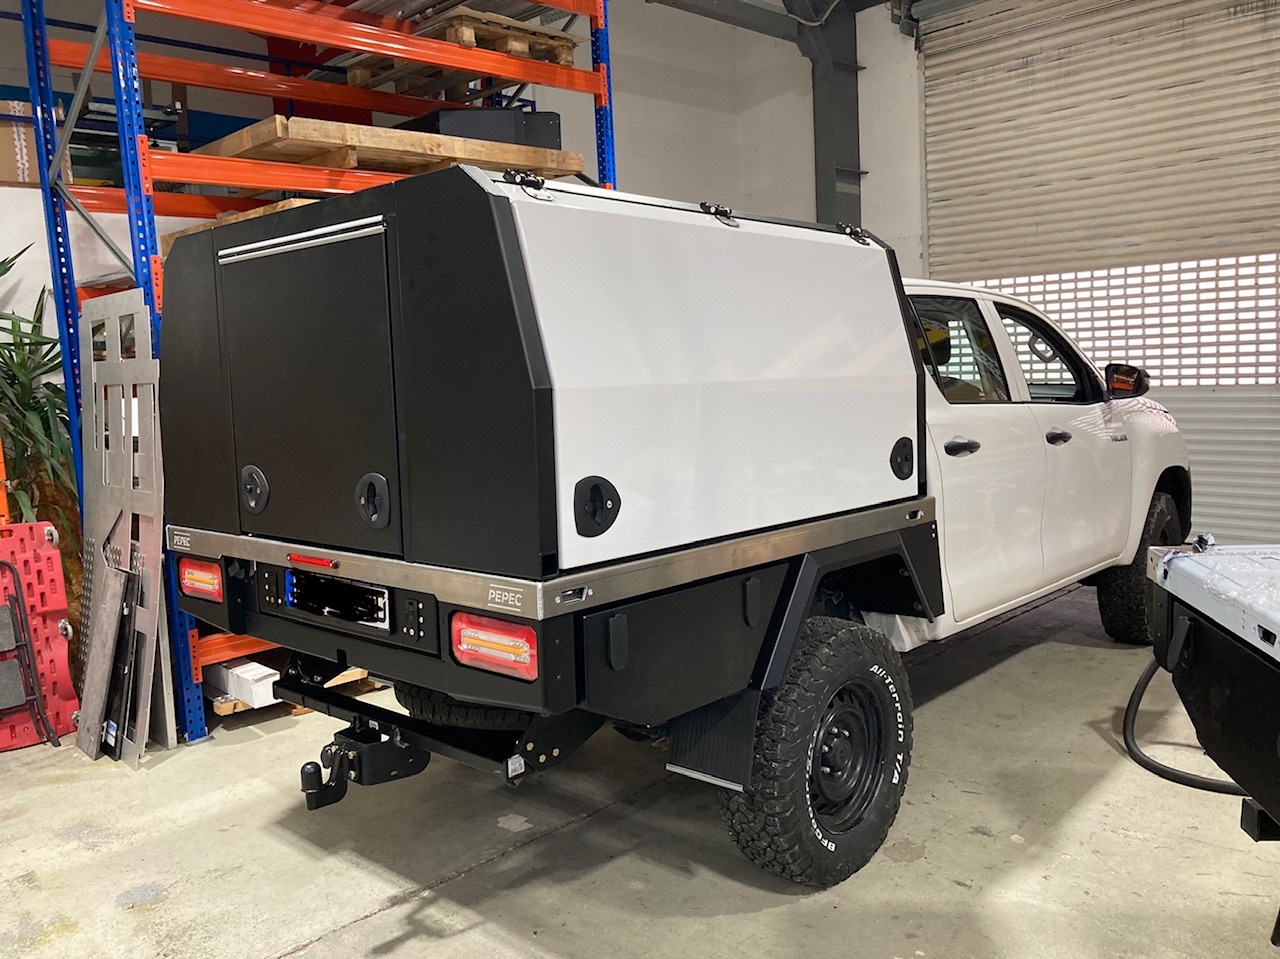 A truck with a brand-new flatbed tray from Pepec is getting ready for delivery